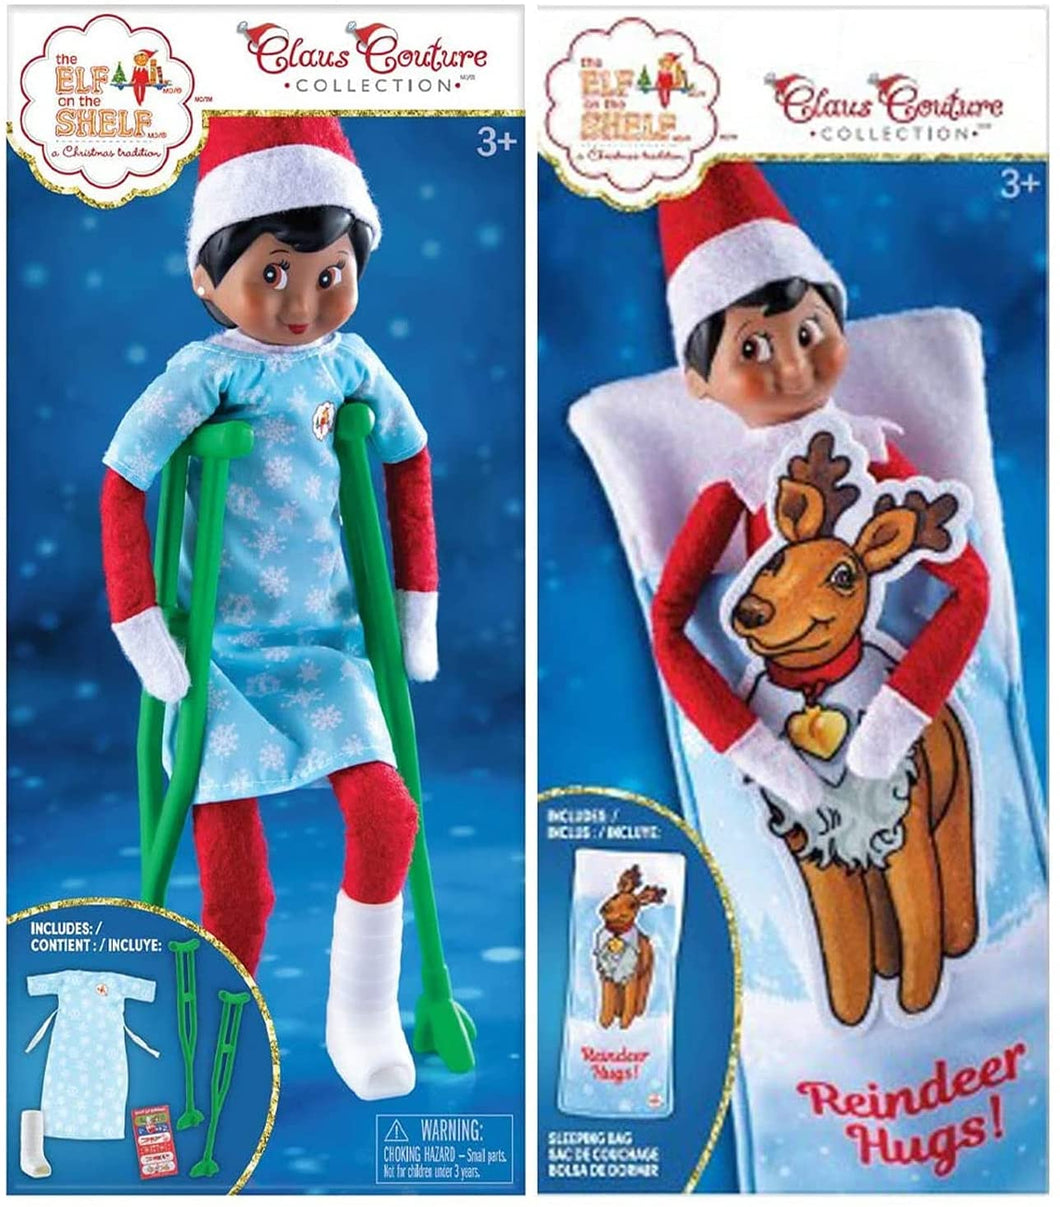 The Elf on the Shelf Holiday Recovery Pack: Elf Care Kit and Reindeer Hugs Sleeping Bag (Scout Elf not Included)